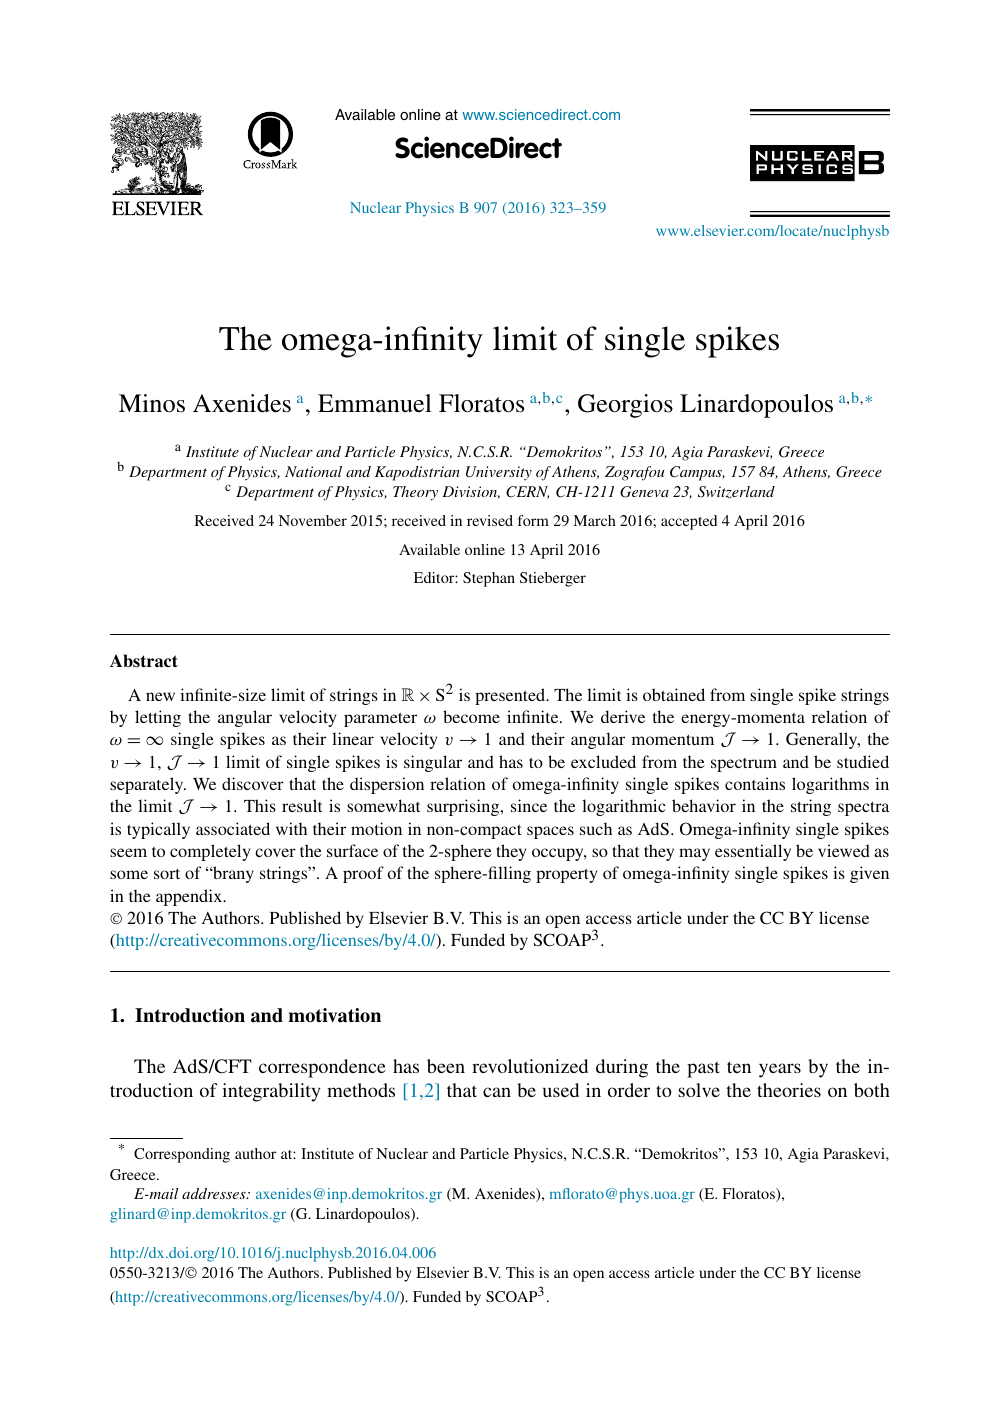 The Omega Infinity Limit Of Single Spikes Topic Of Research Paper In Physical Sciences Download Scholarly Article Pdf And Read For Free On Cyberleninka Open Science Hub